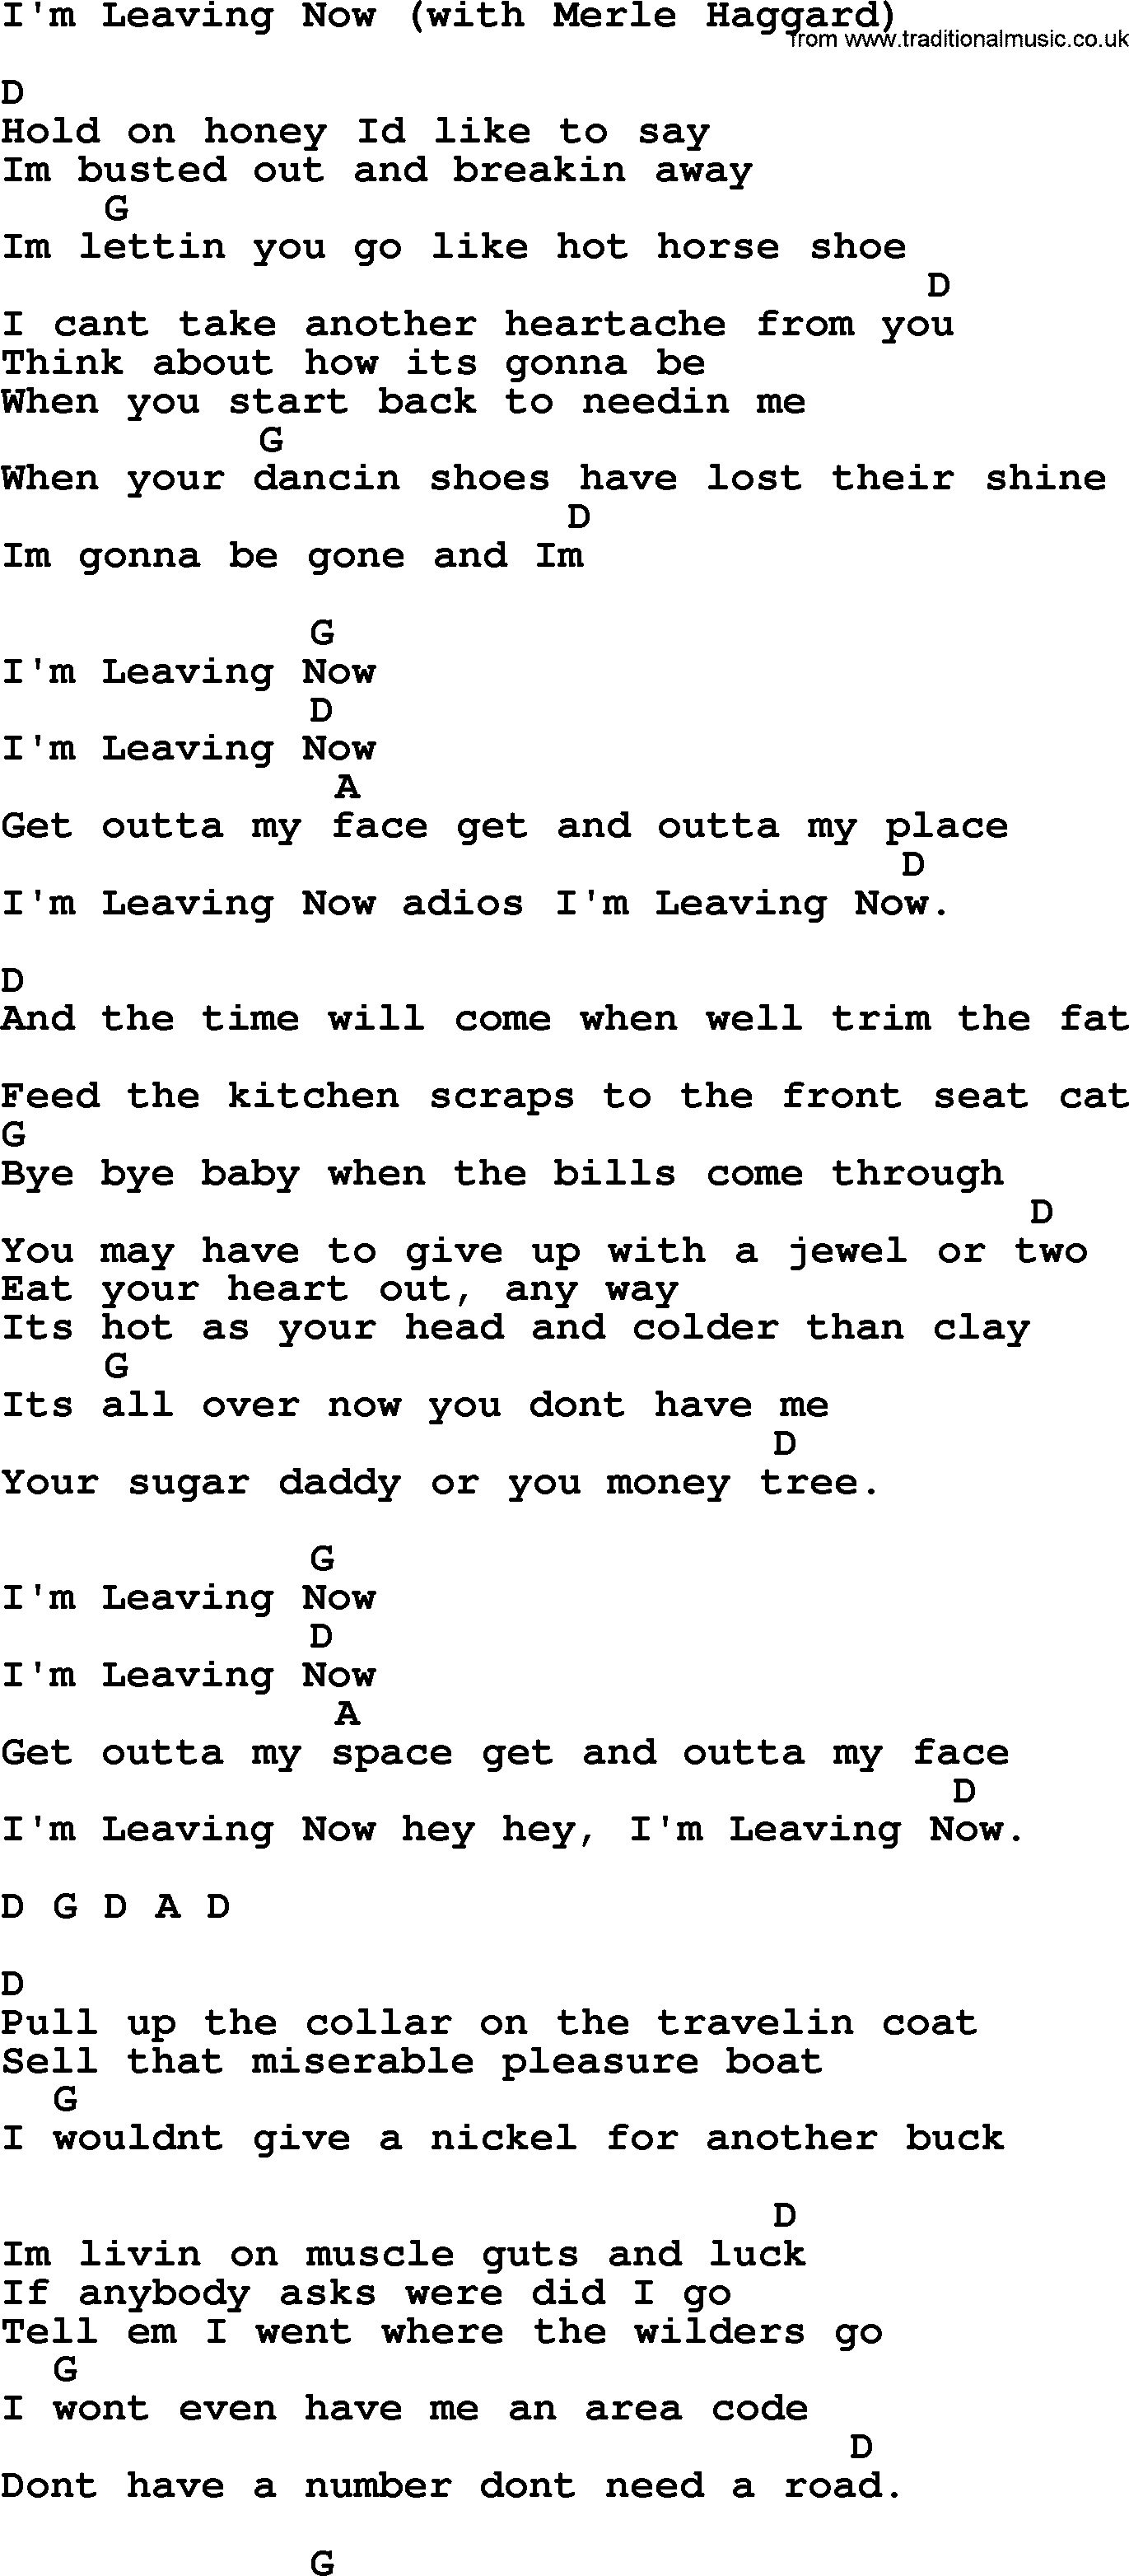 Johnny Cash song I'm Leaving Now, lyrics and chords